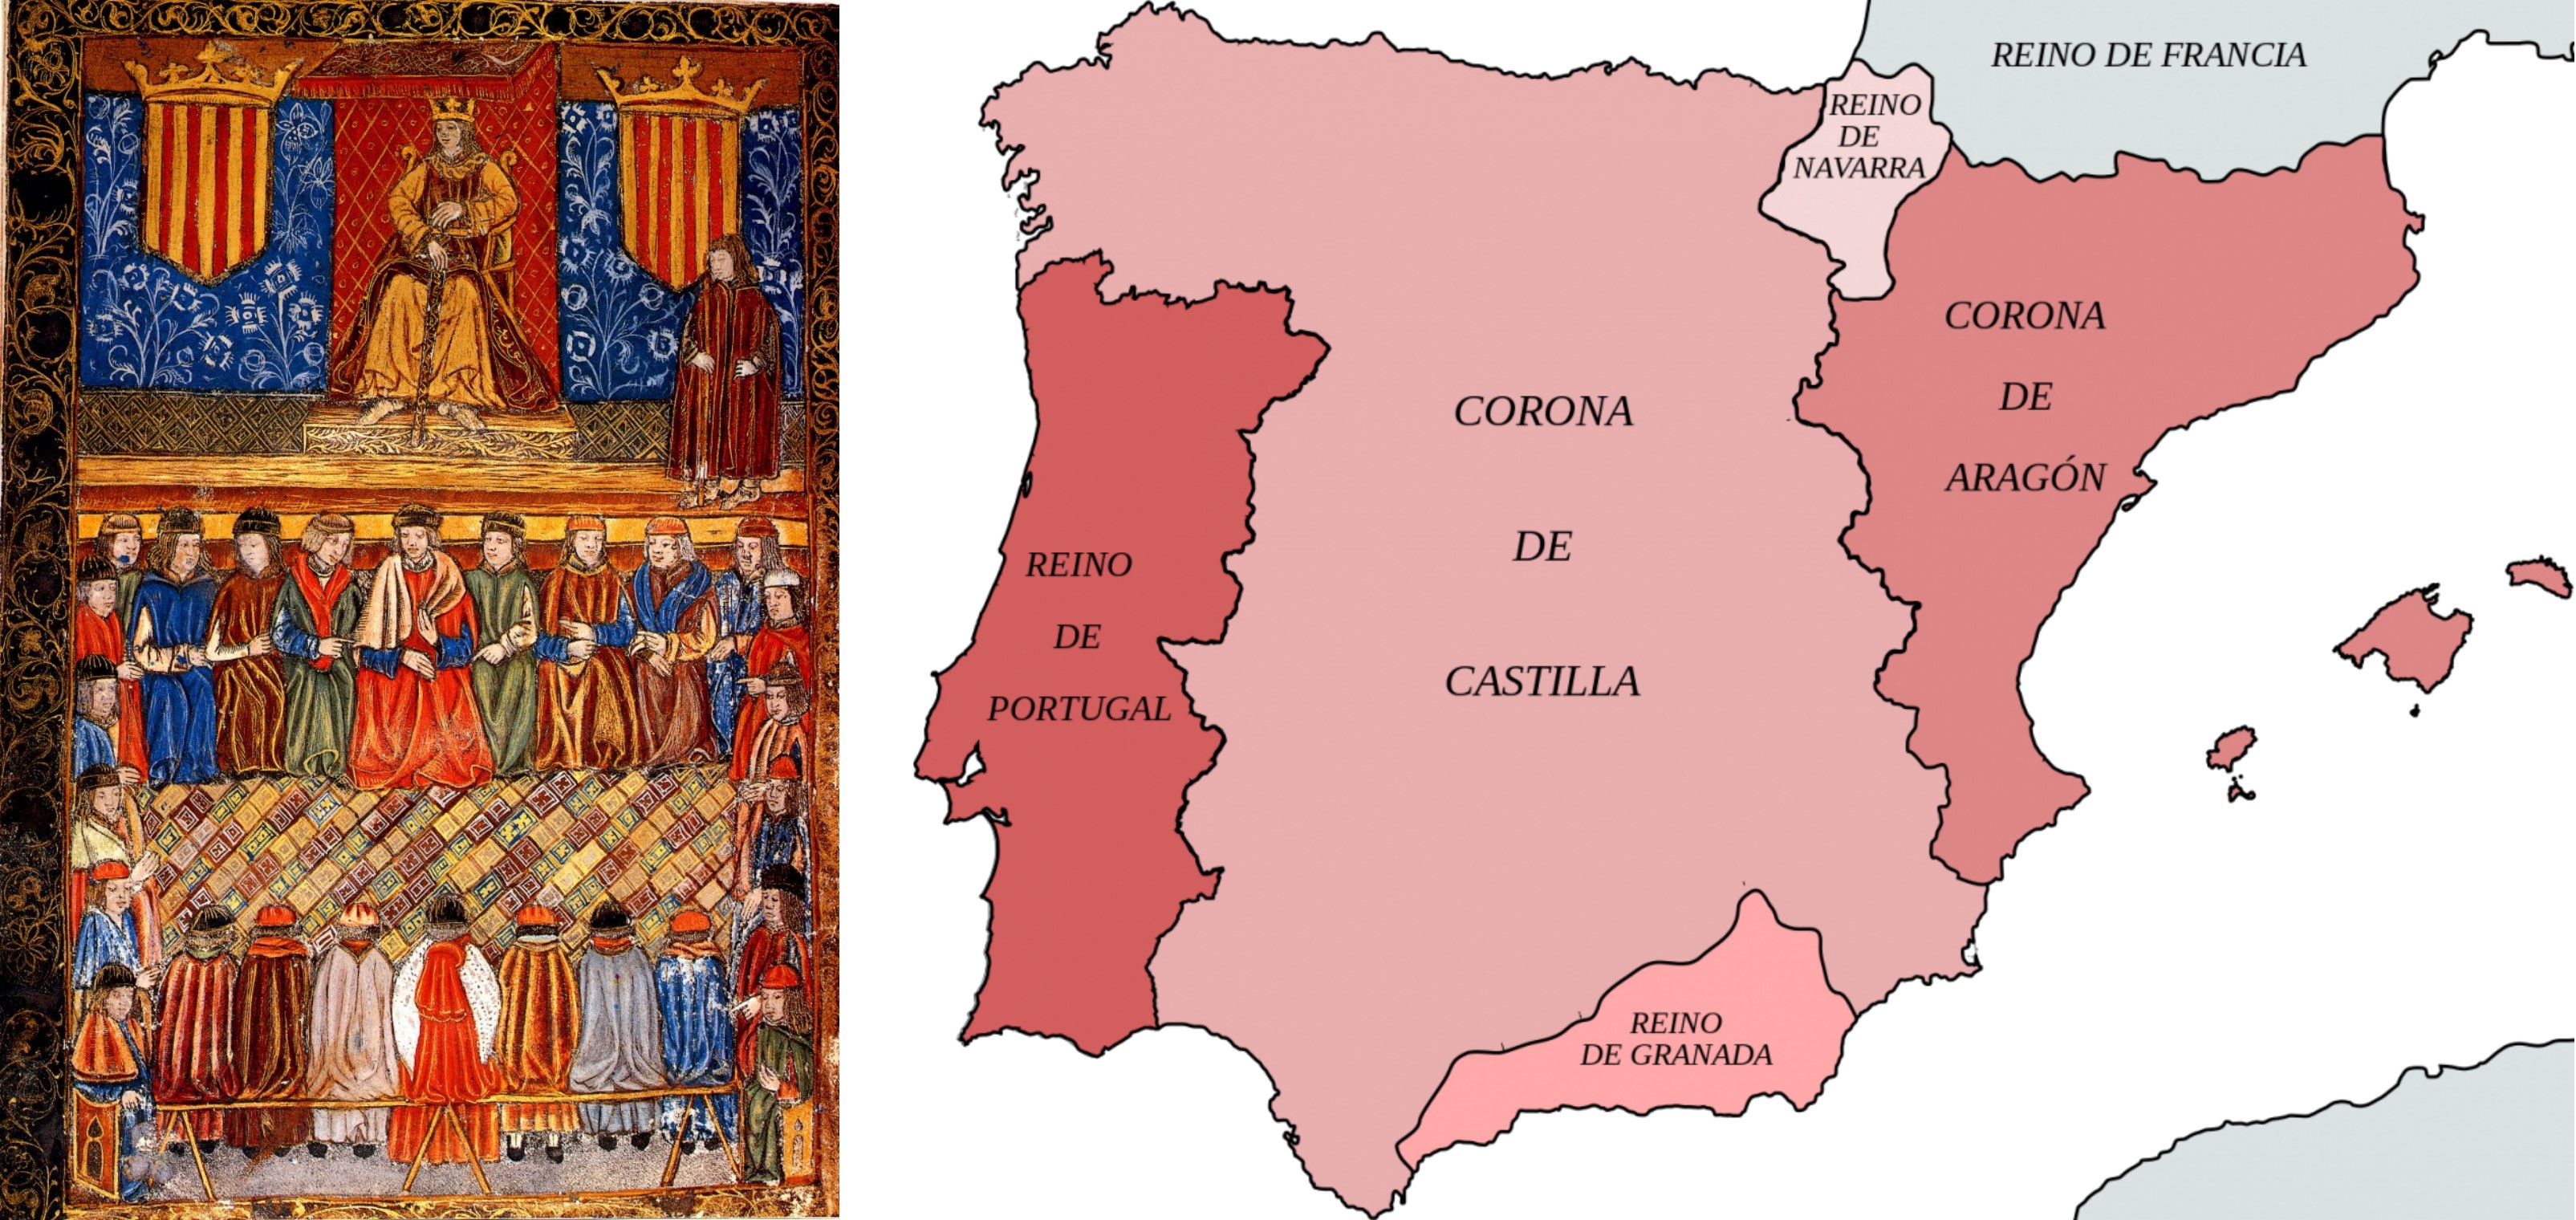 On the left, the Corts of Catalunya. On the right, a map of the Iberian Kingdoms.